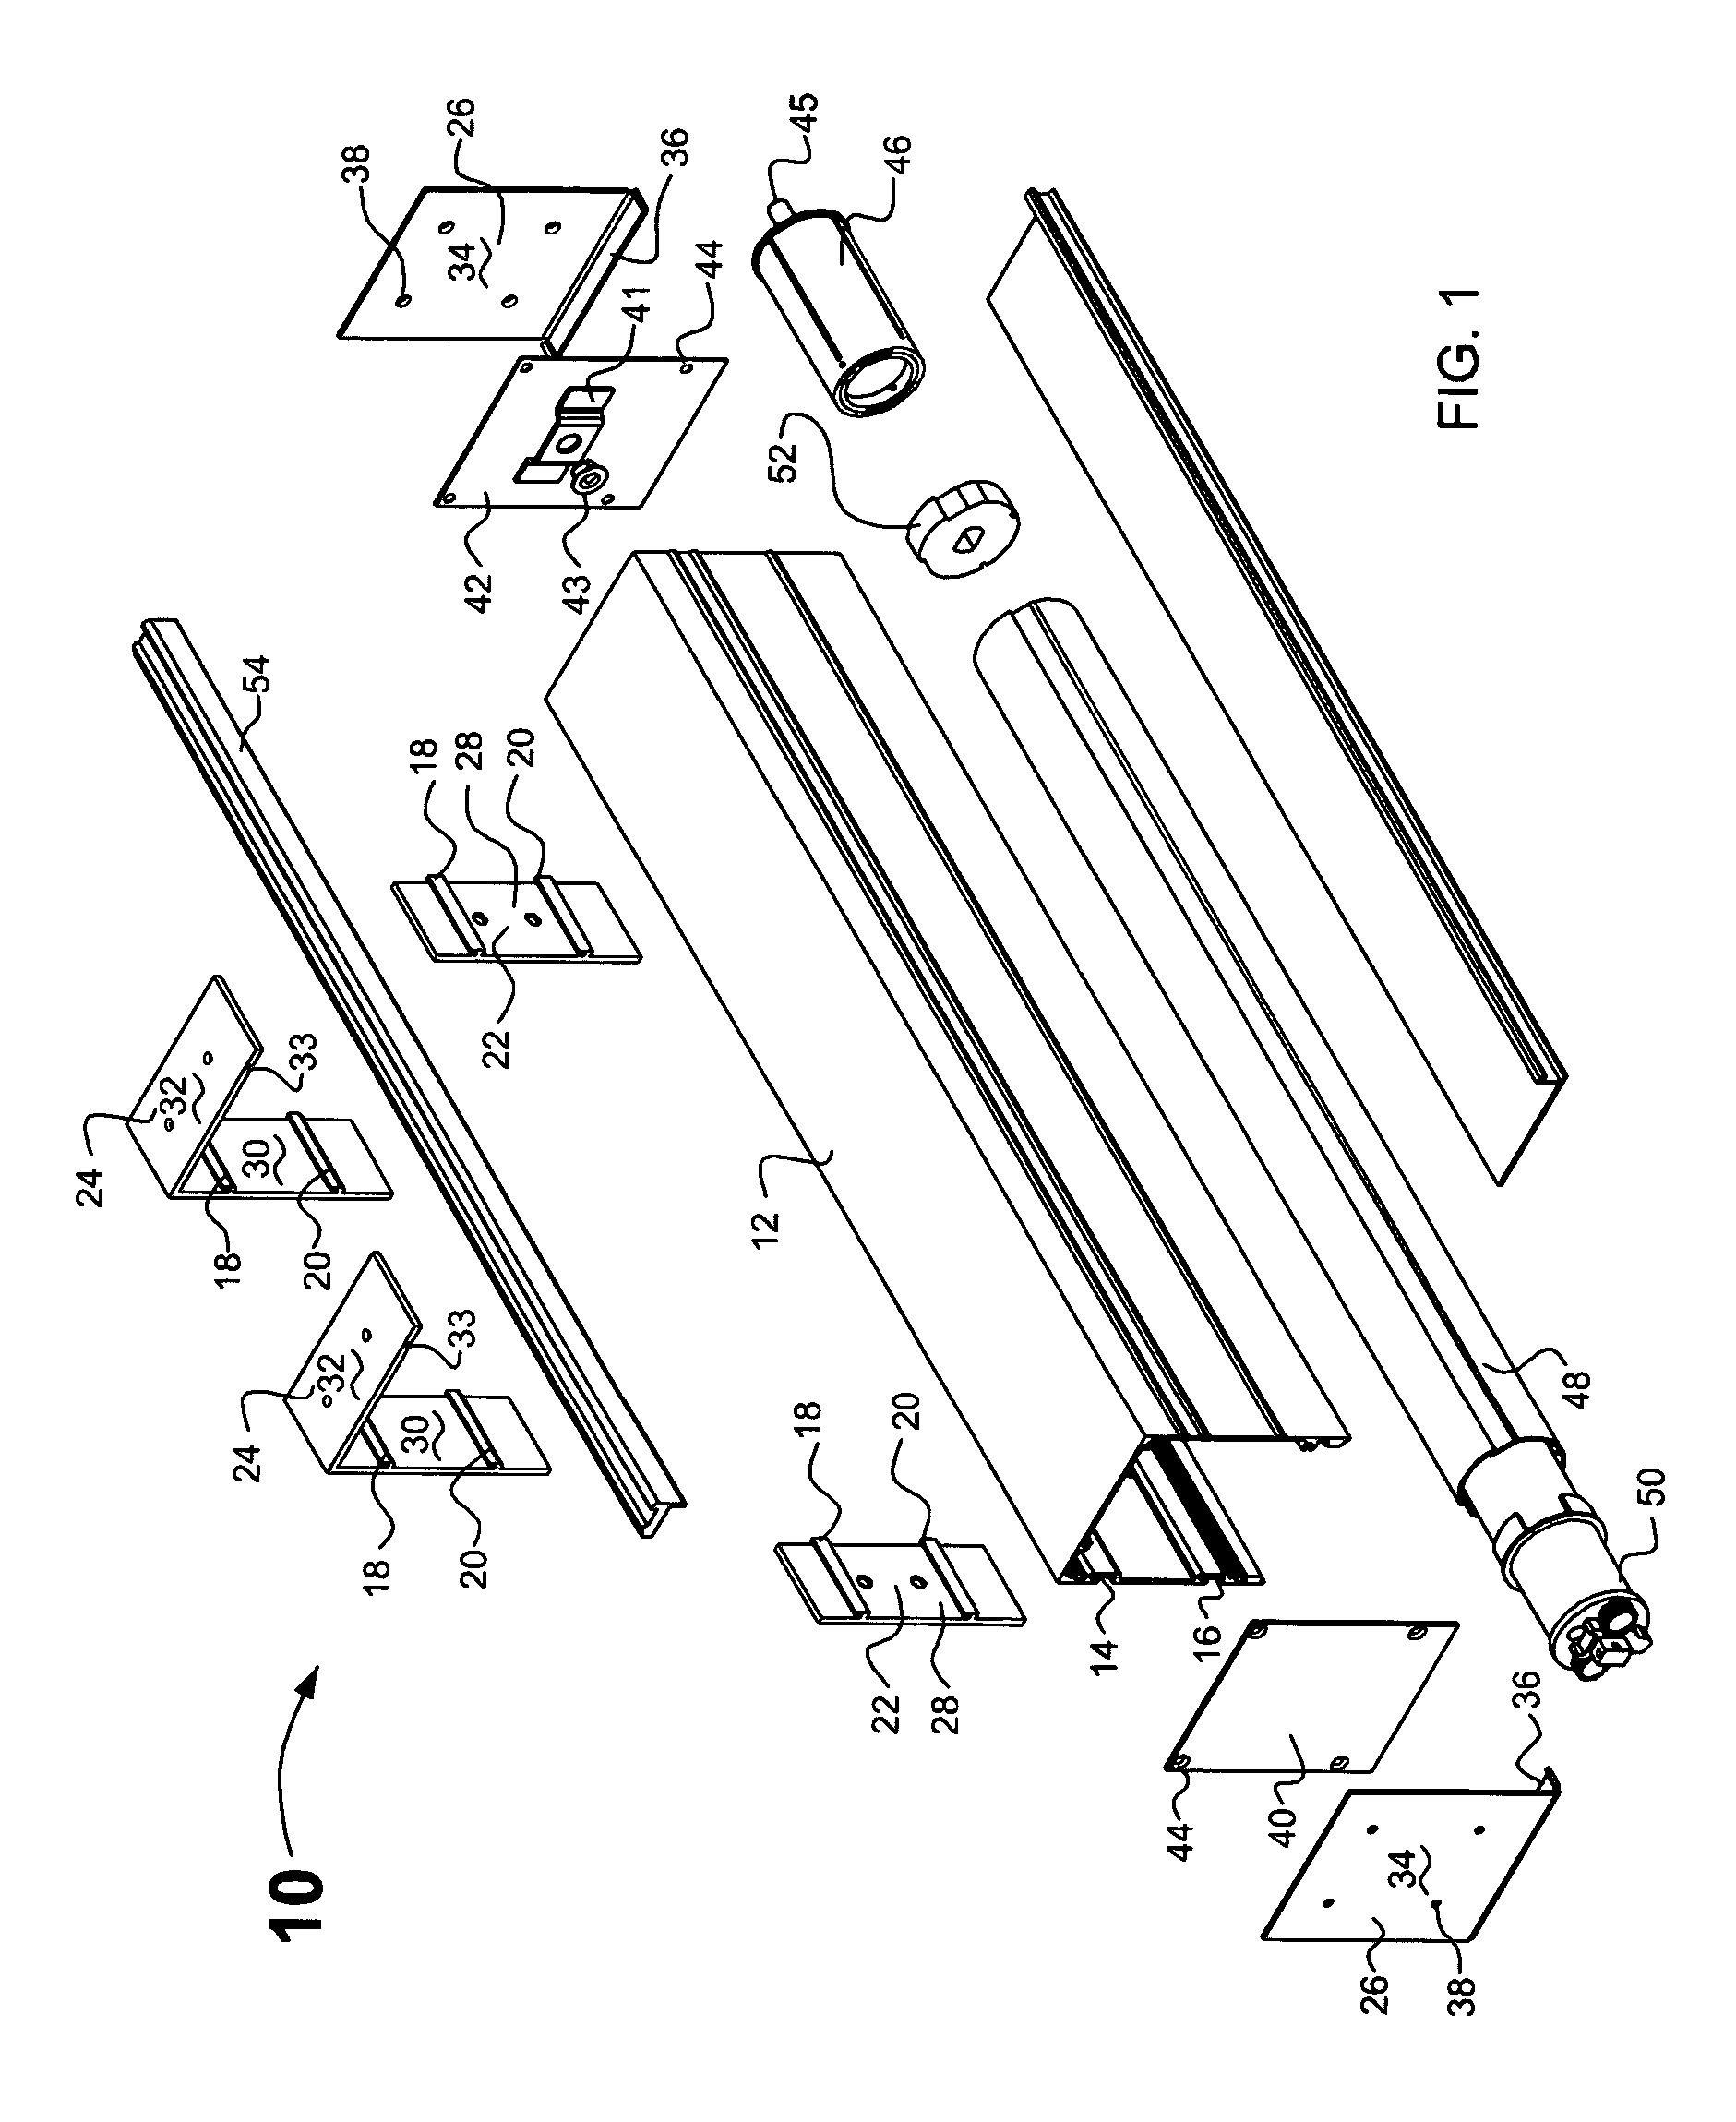 Method and apparatus for installing window coverings